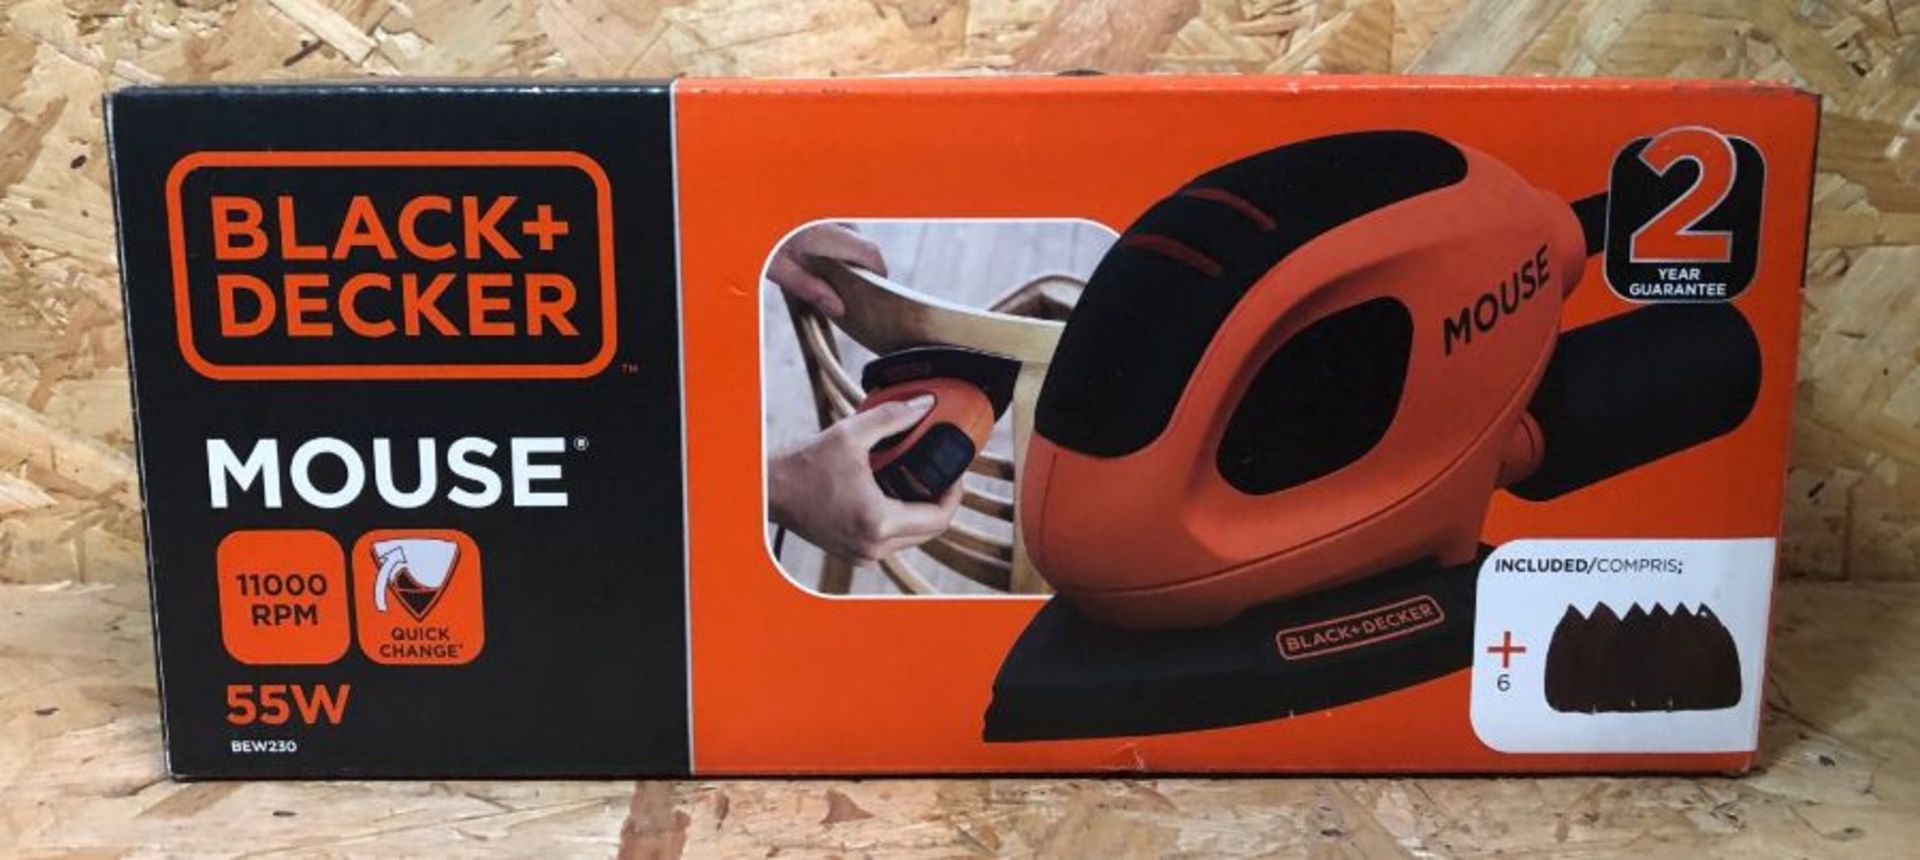 5 X BLACK & DECKER 55W 240V CORDED DETAIL SANDERS BEW230-GB / COMBINDED RRP £100.00 / UNTESTED